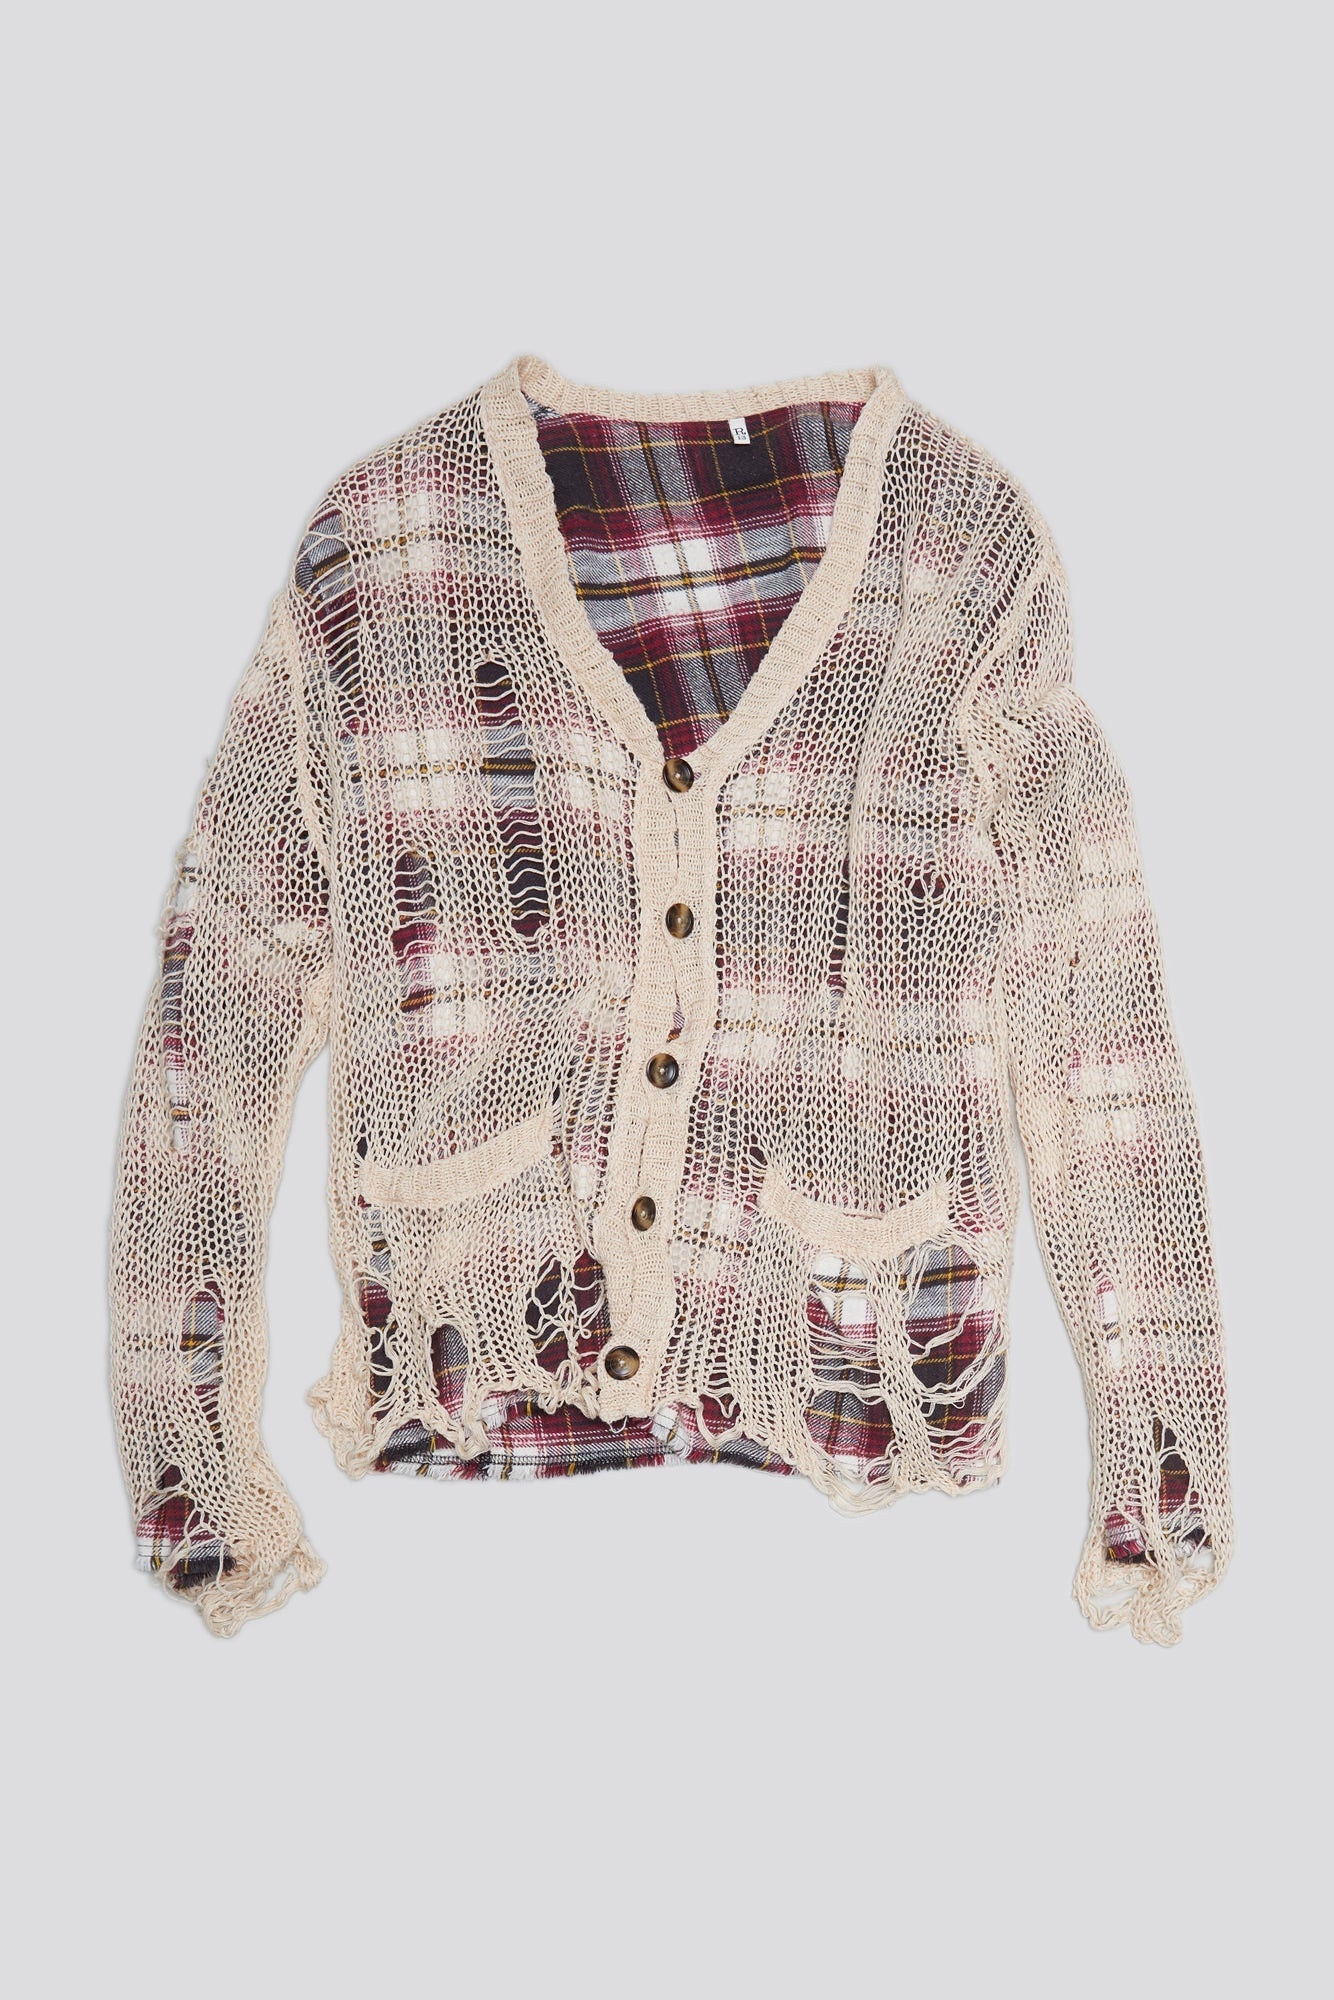 RELAXED OVERLAY CARDIGAN - CREAM AND BLACK PLAID - 3